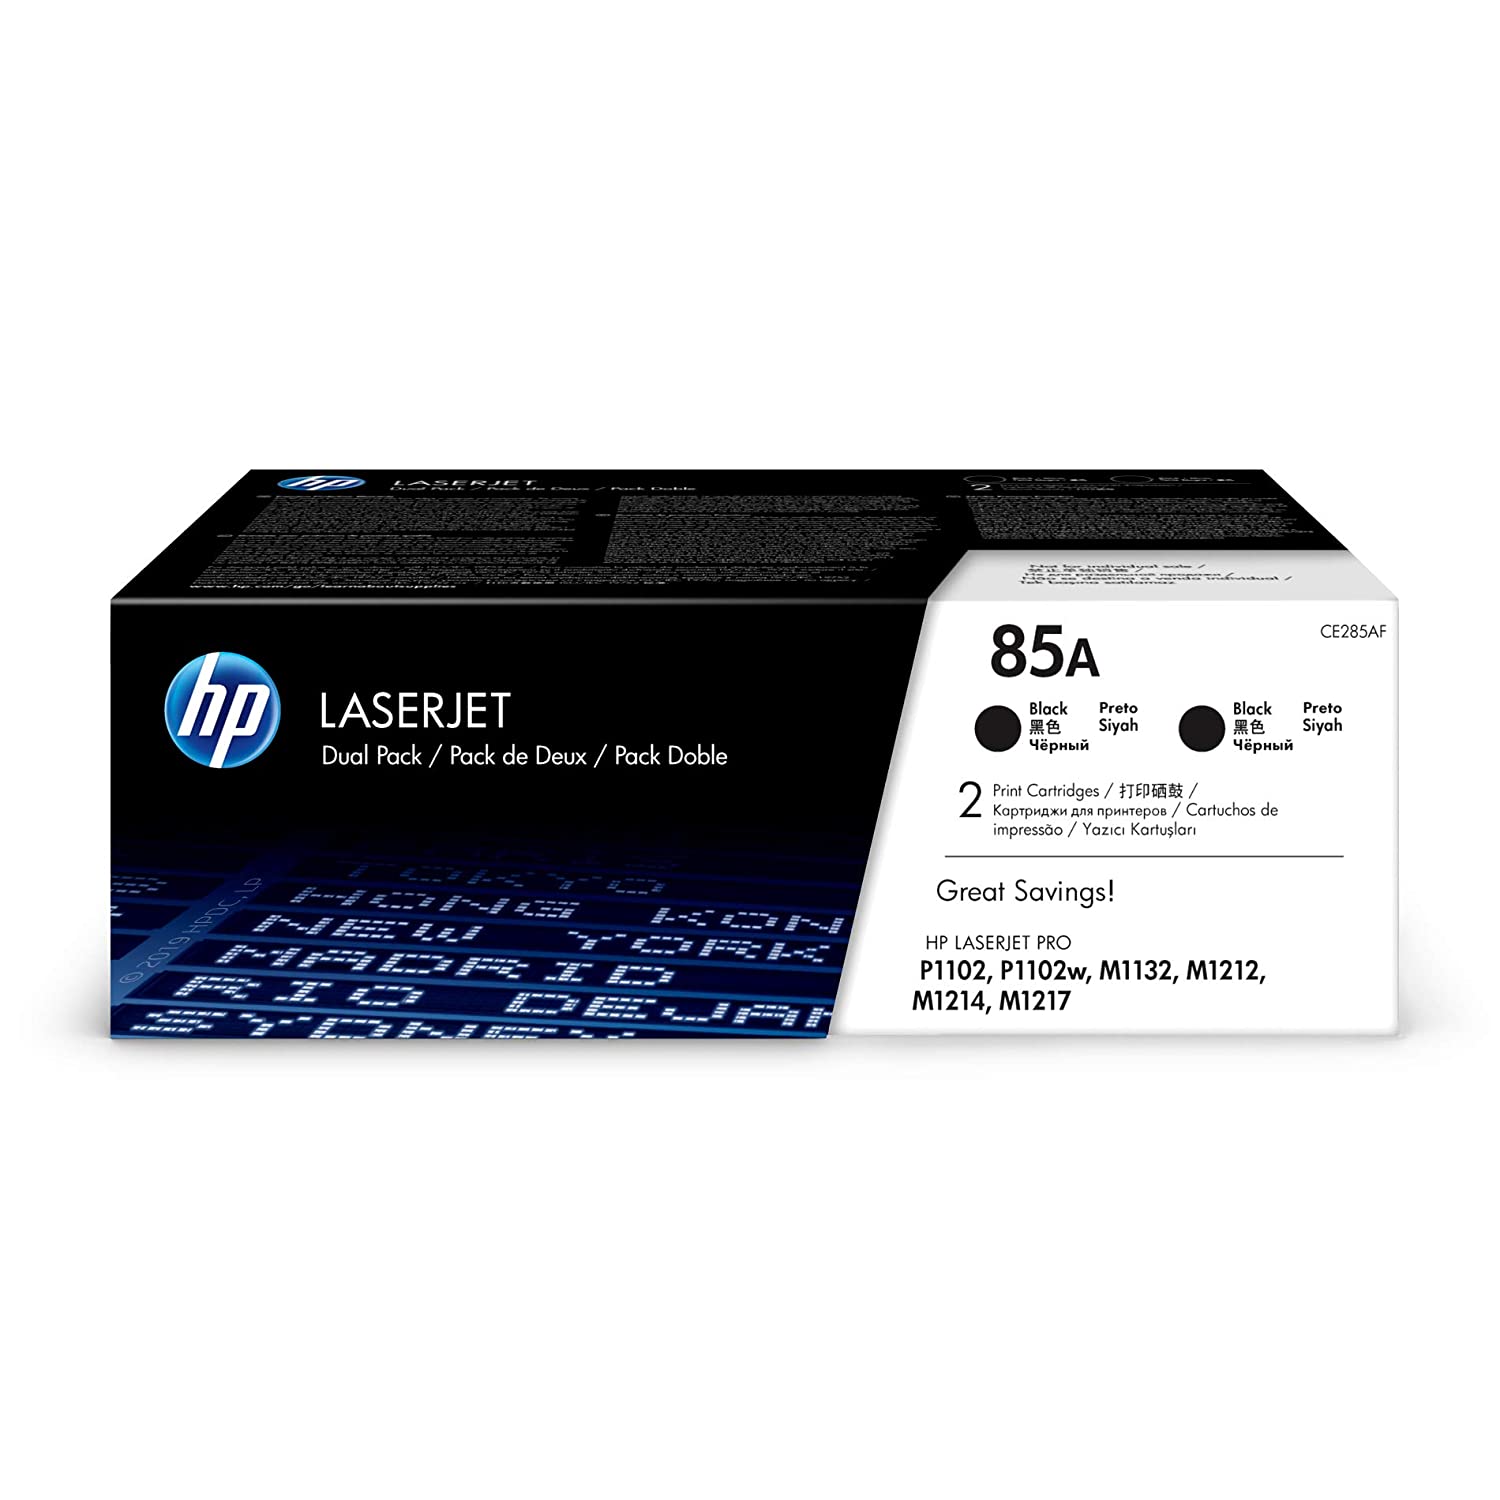 HP TONER CE285 FOR HP 1102